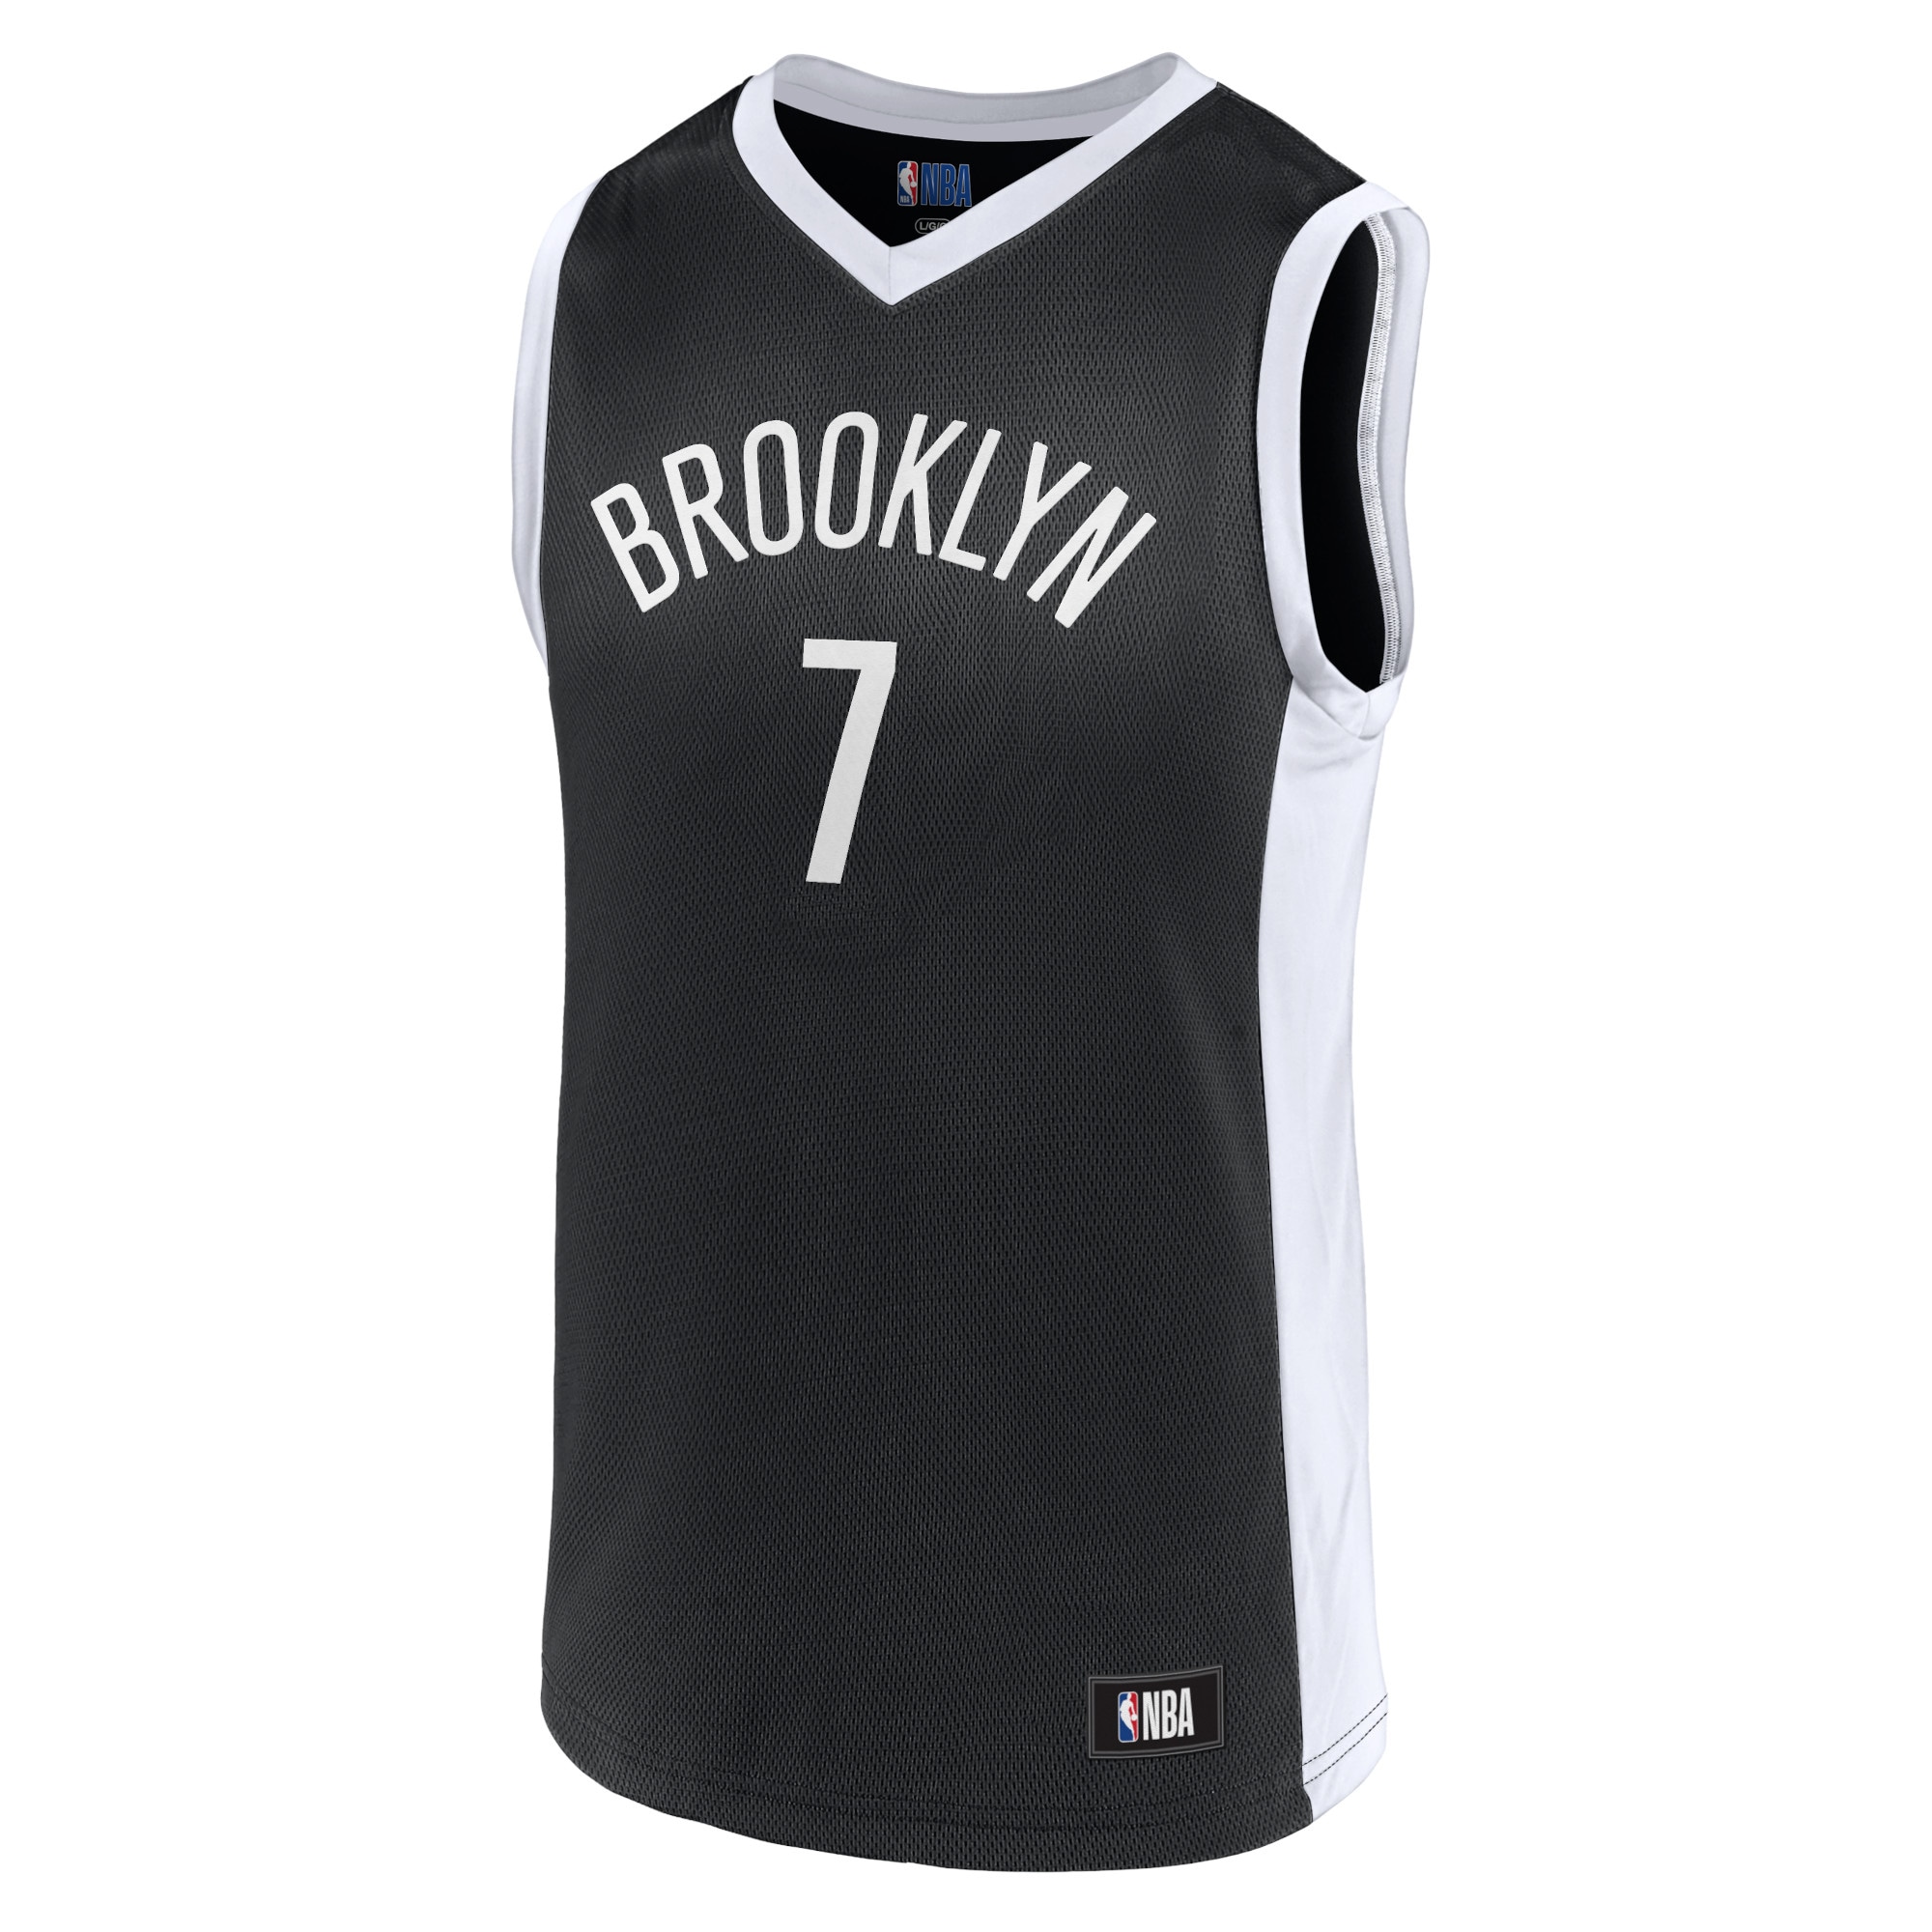 Men's Fanatics Branded Kevin Durant Black Brooklyn Nets Player Jersey - image 2 of 3